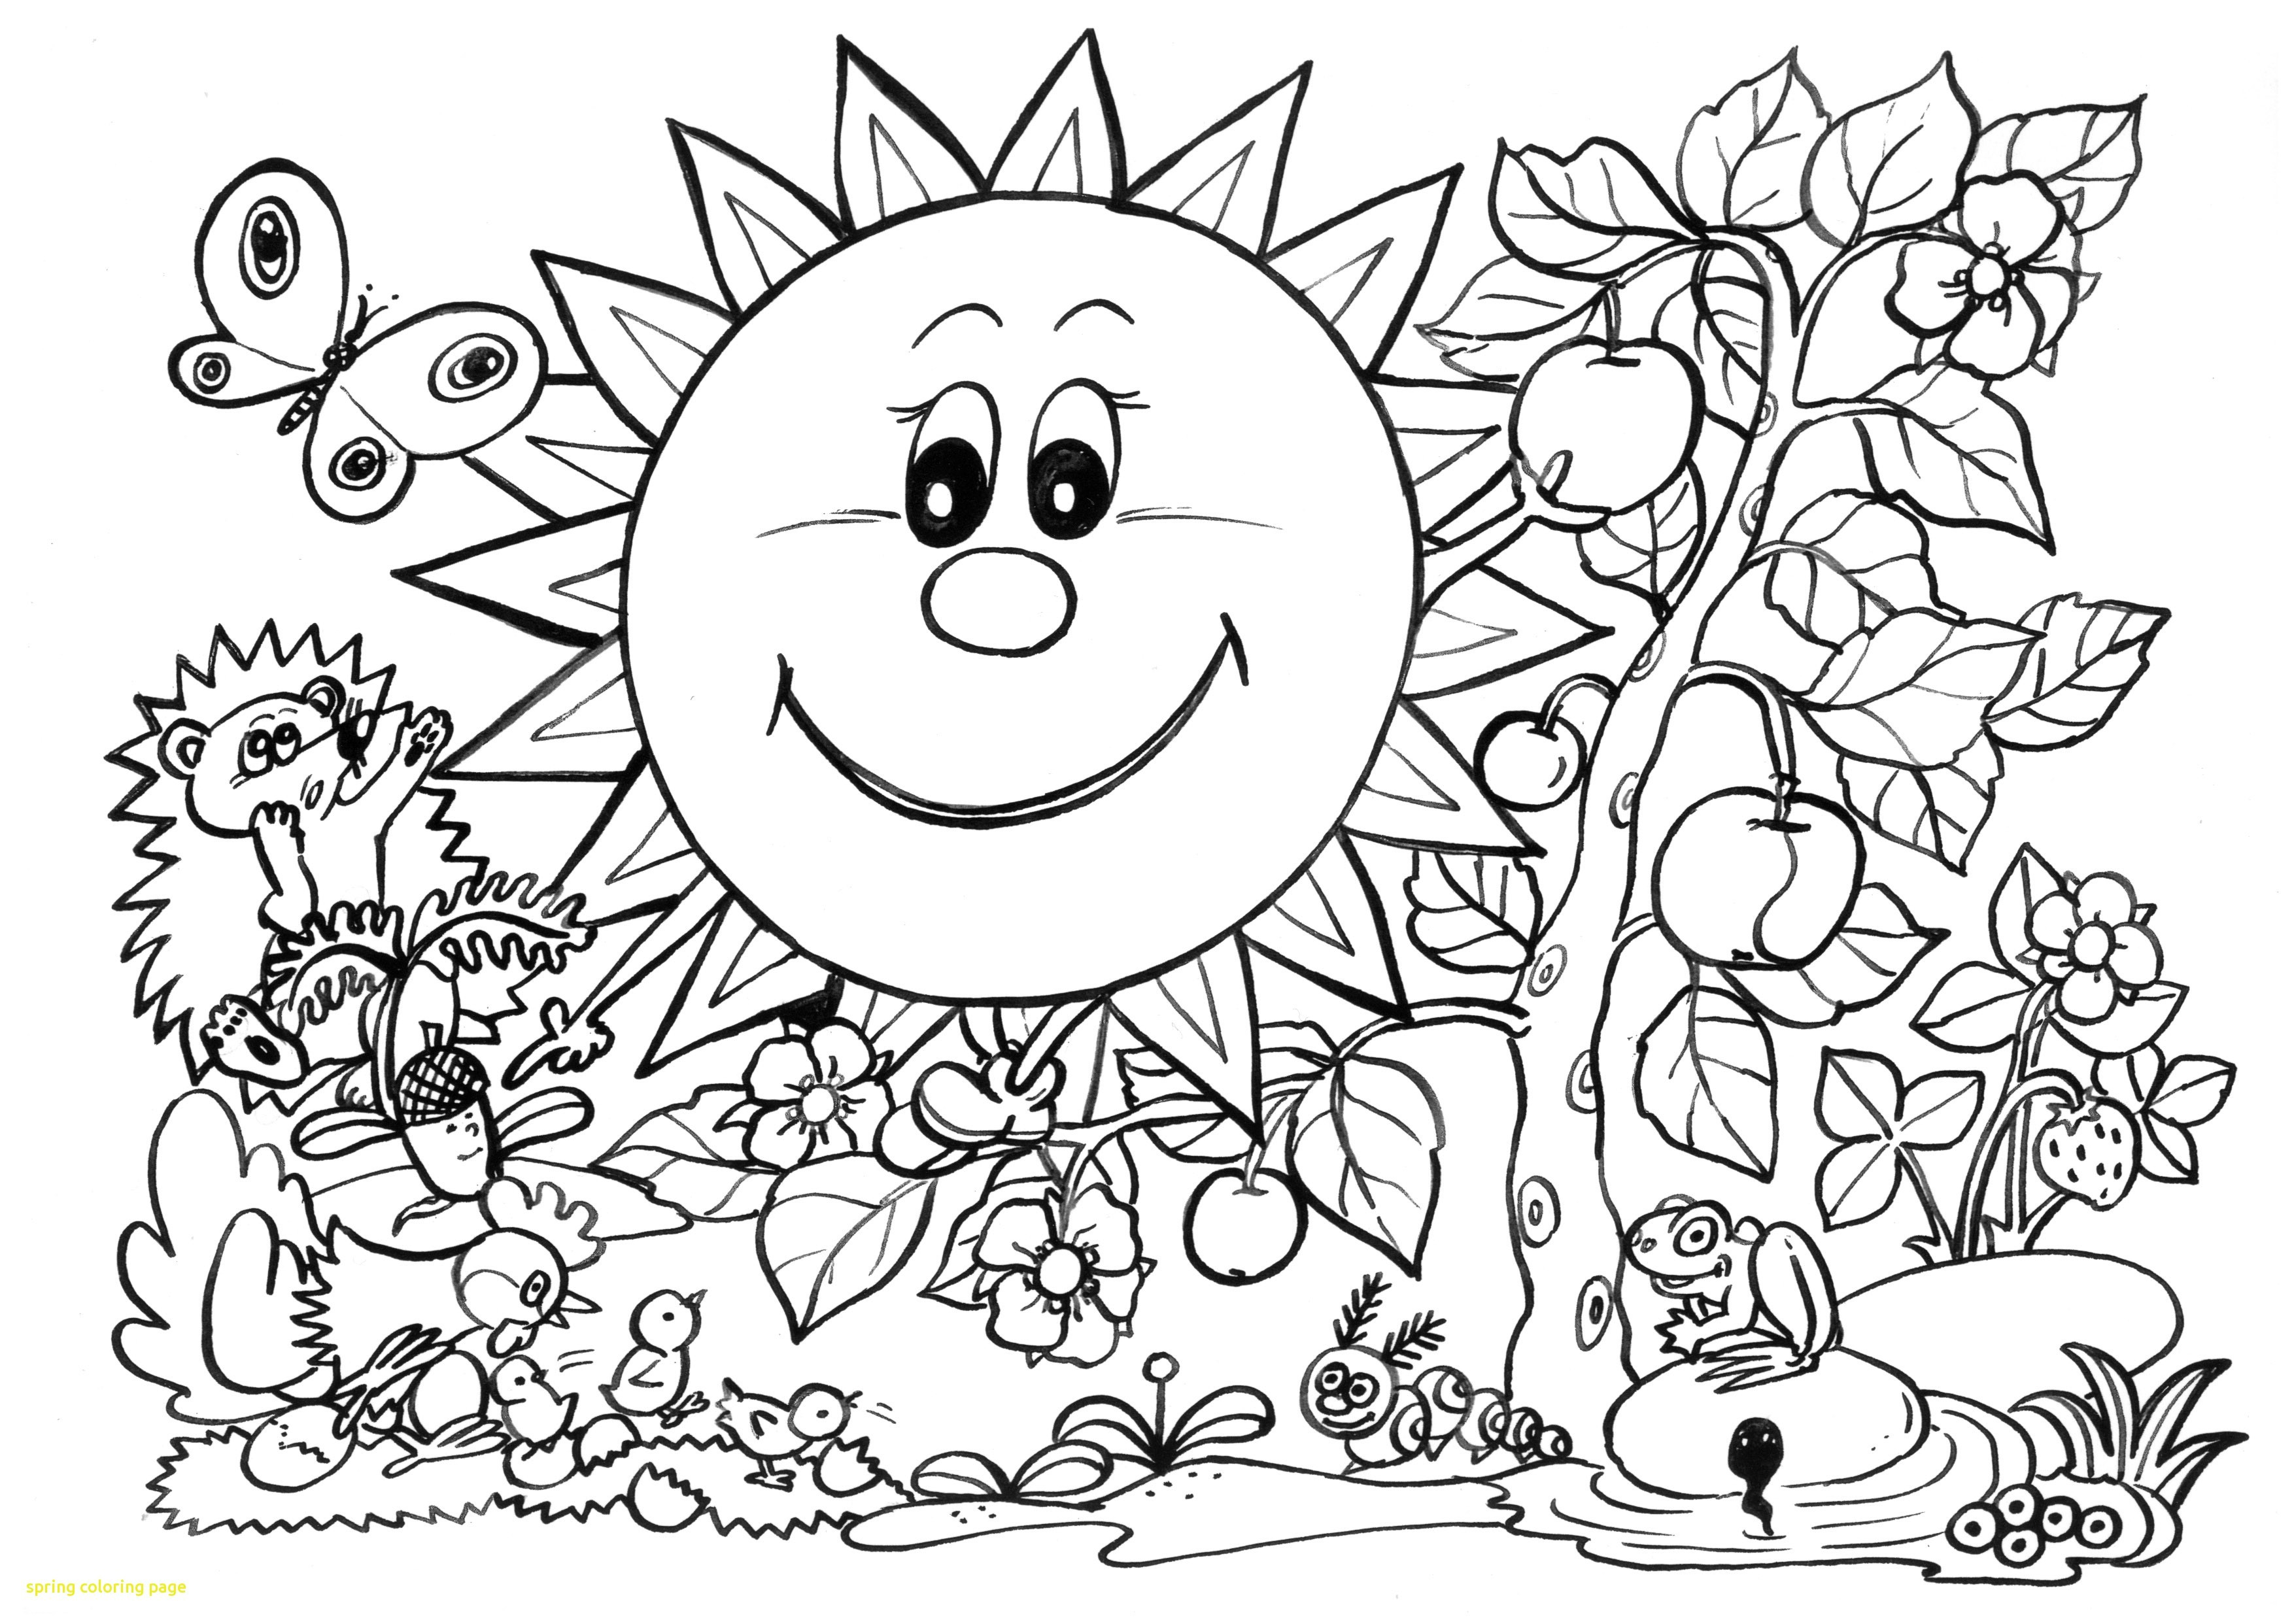 Coloring Ideas : Cute Spring Coloring Pages Unique Free Printable - Spring Coloring Sheets Free Printable